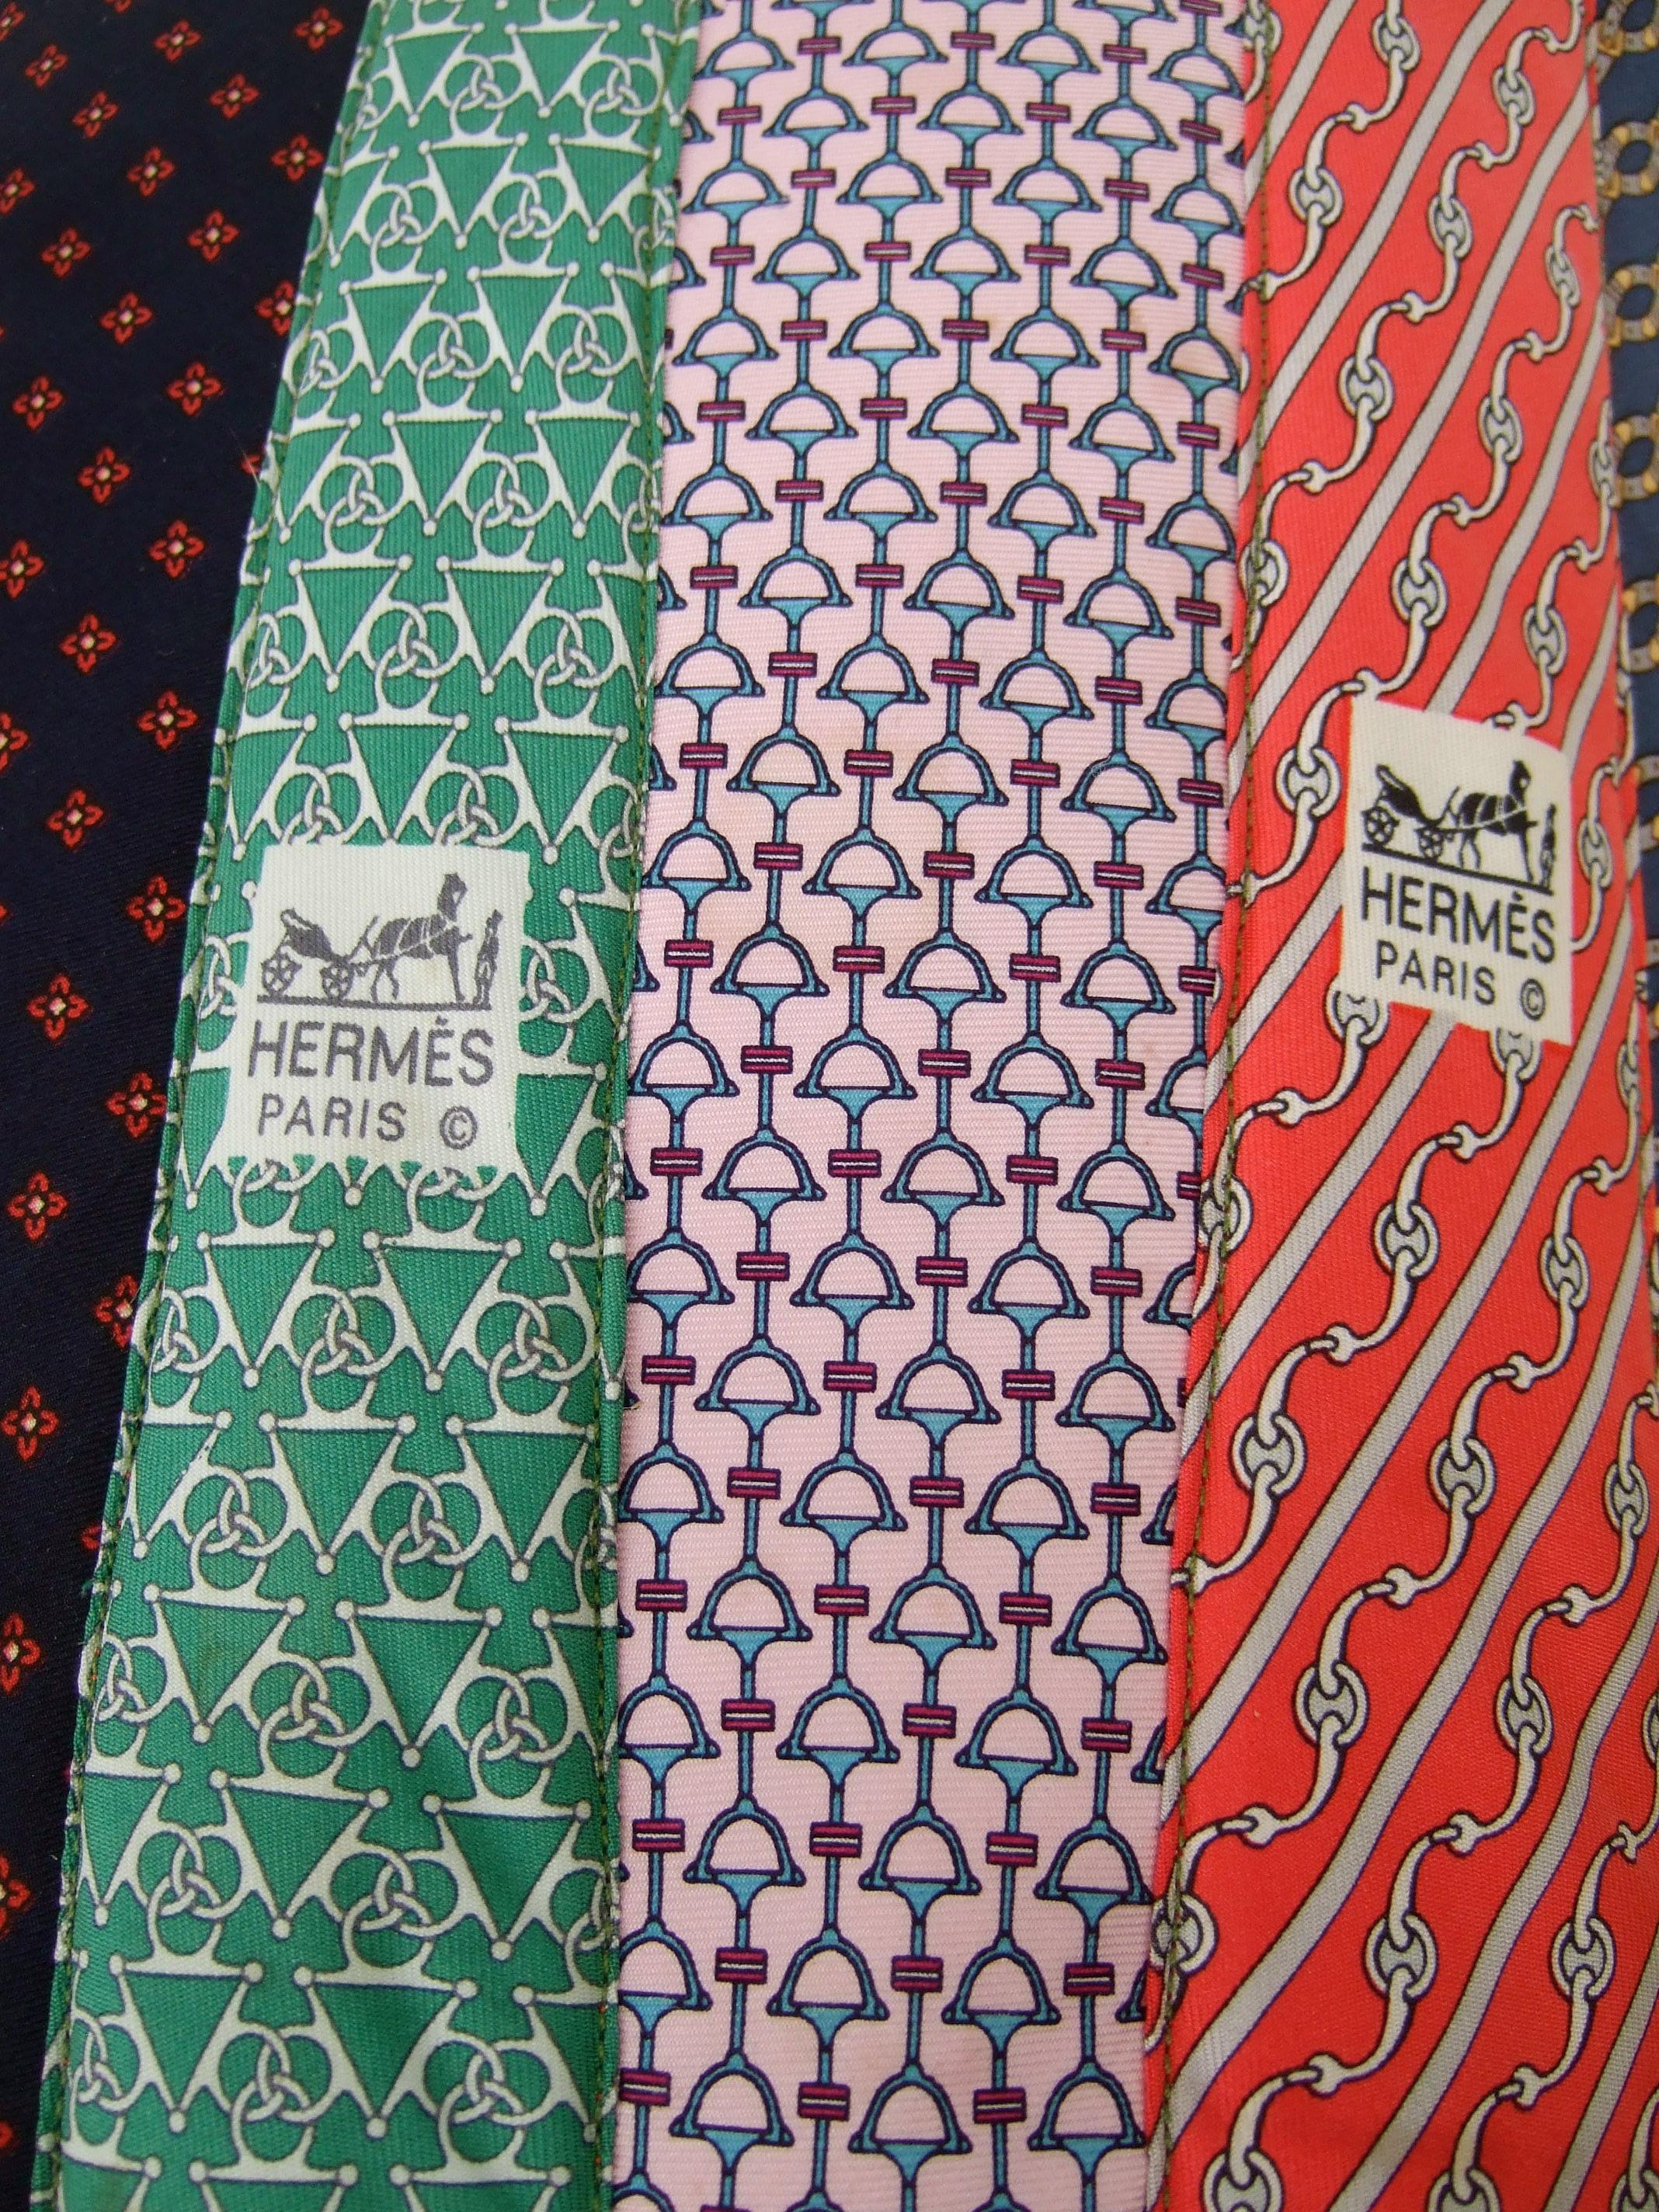 Pair of Vintage Hermes & Gucci Silk Necktie Up-cycled Handmade Pillows c 1980s  For Sale 2